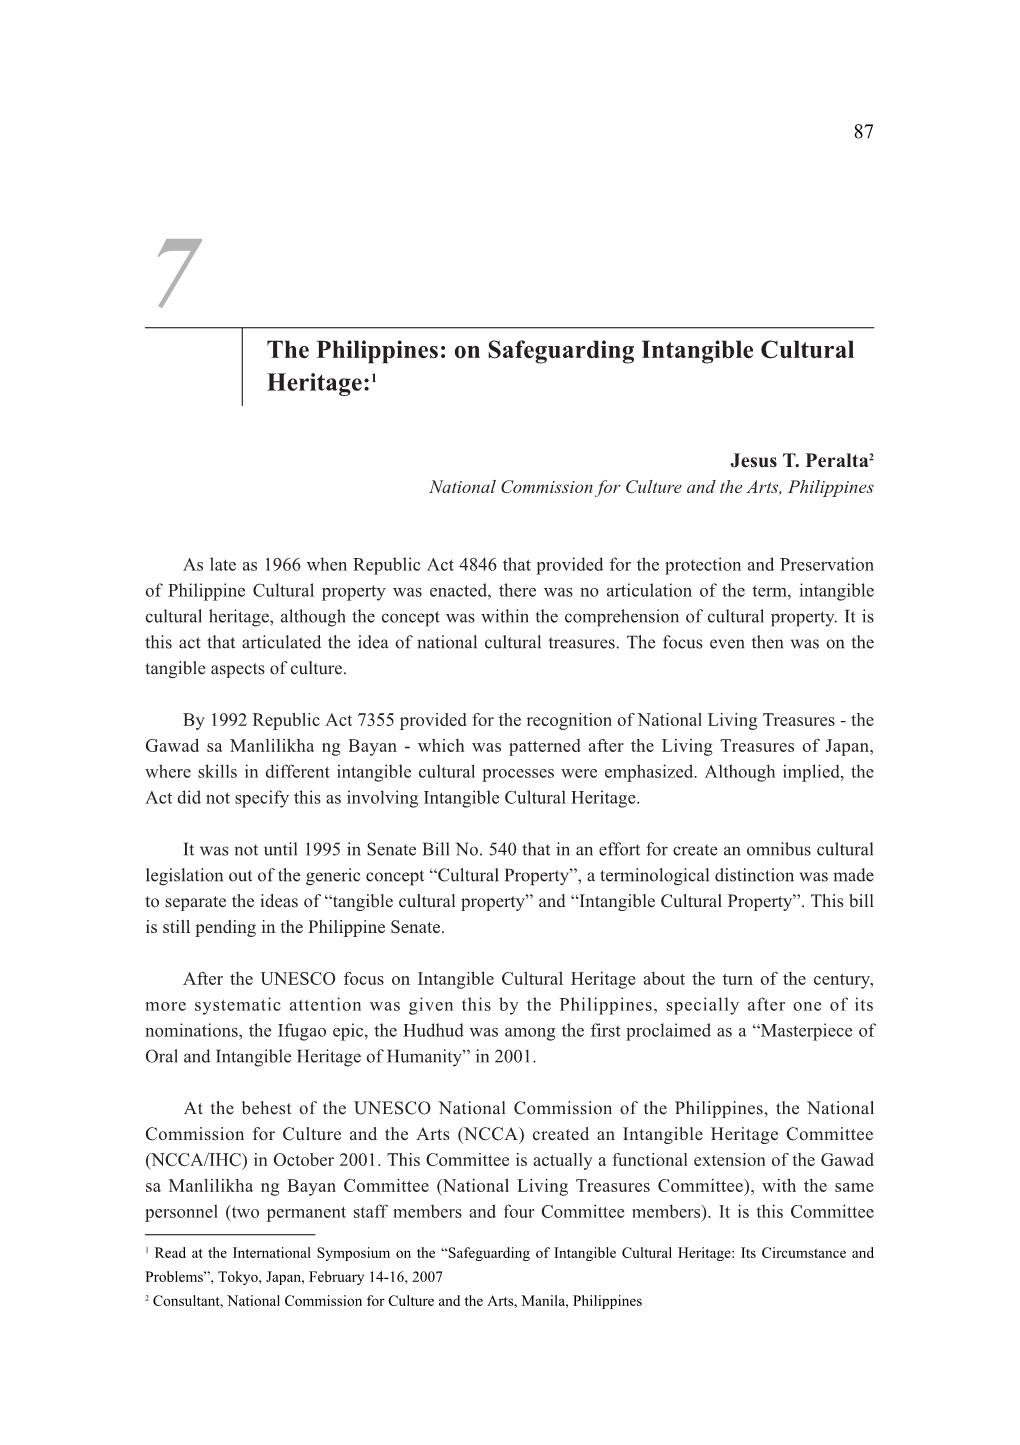 On Safeguarding Intangible Cultural Heritage:1